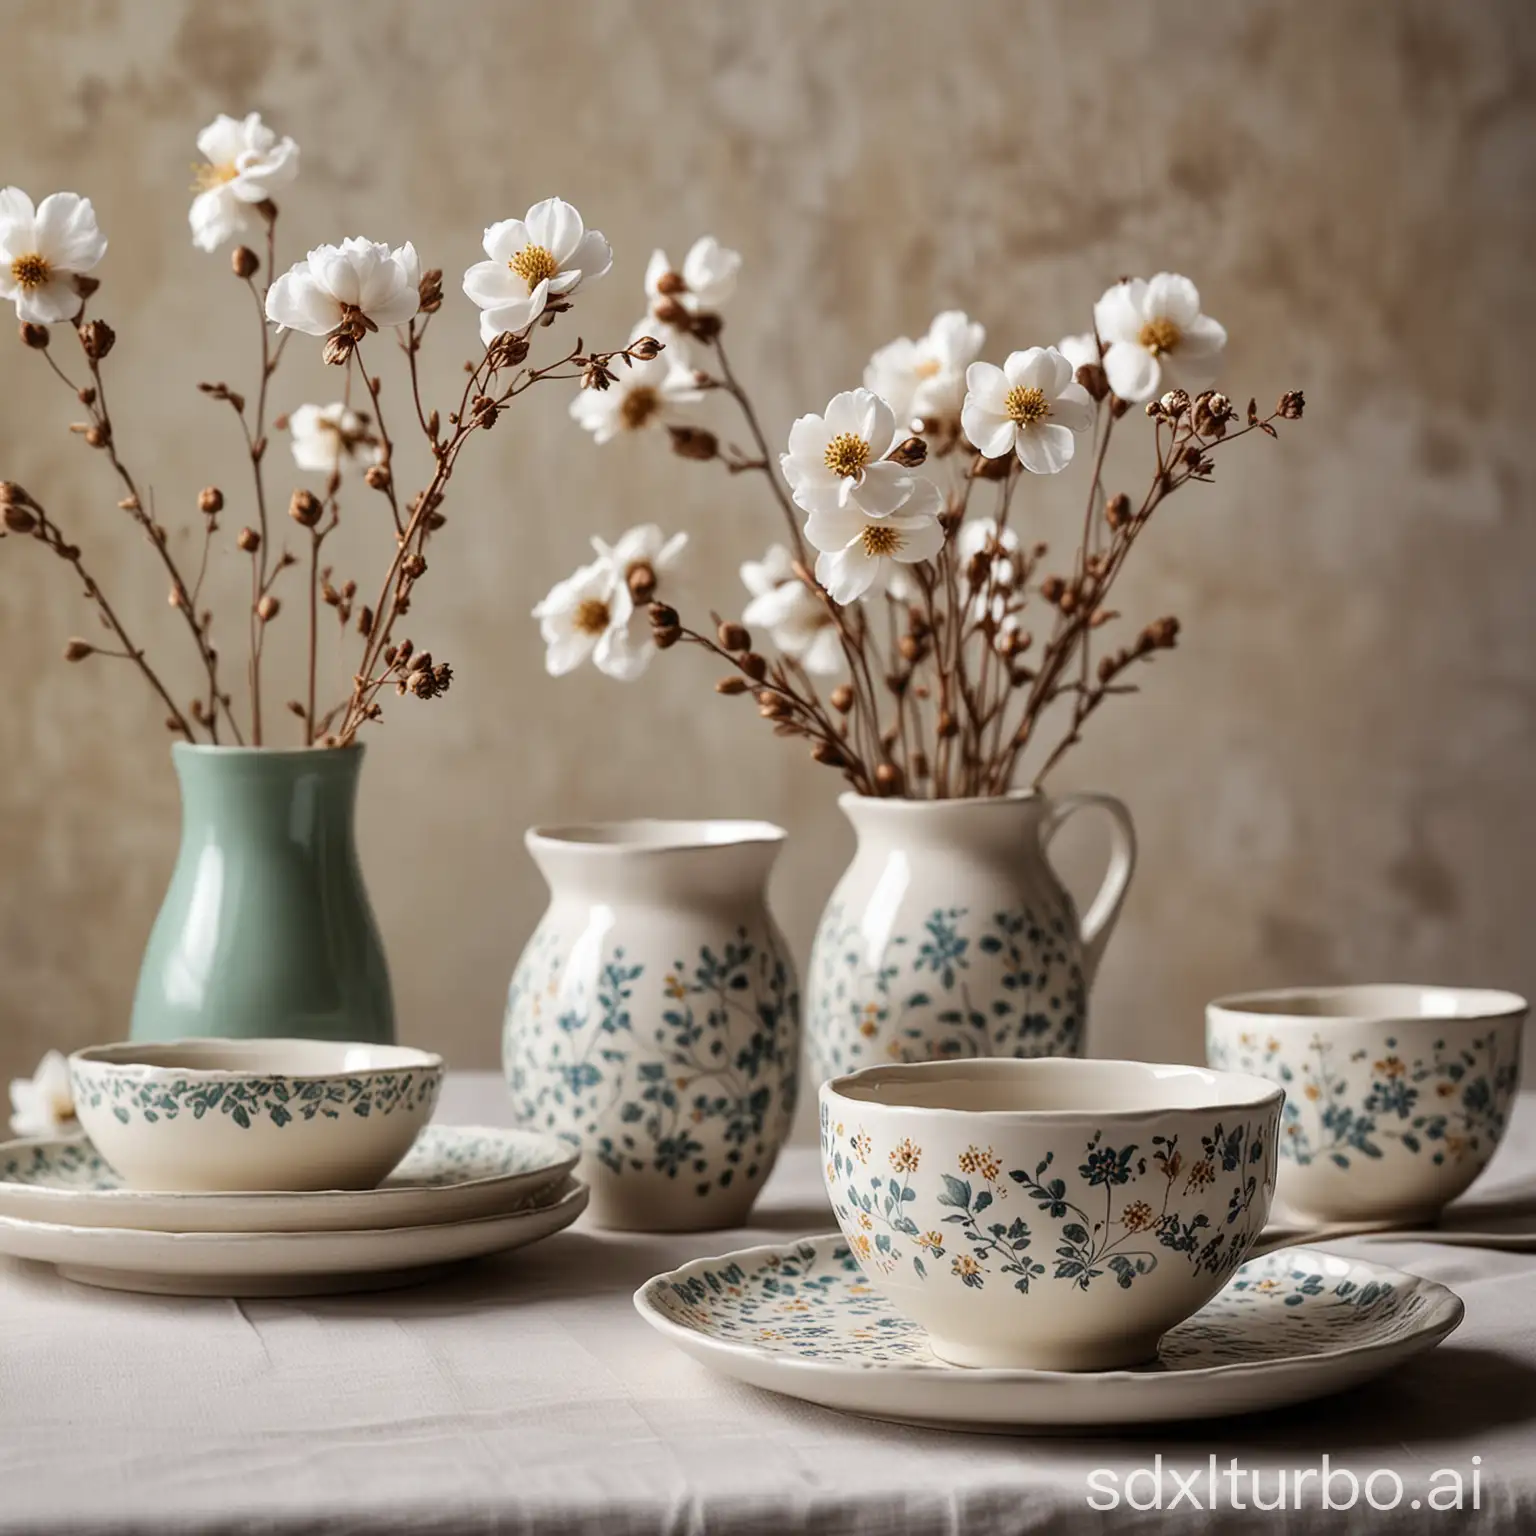 Ceramic-Tableware-with-Cotton-Flower-Patterns-and-Blurred-Background